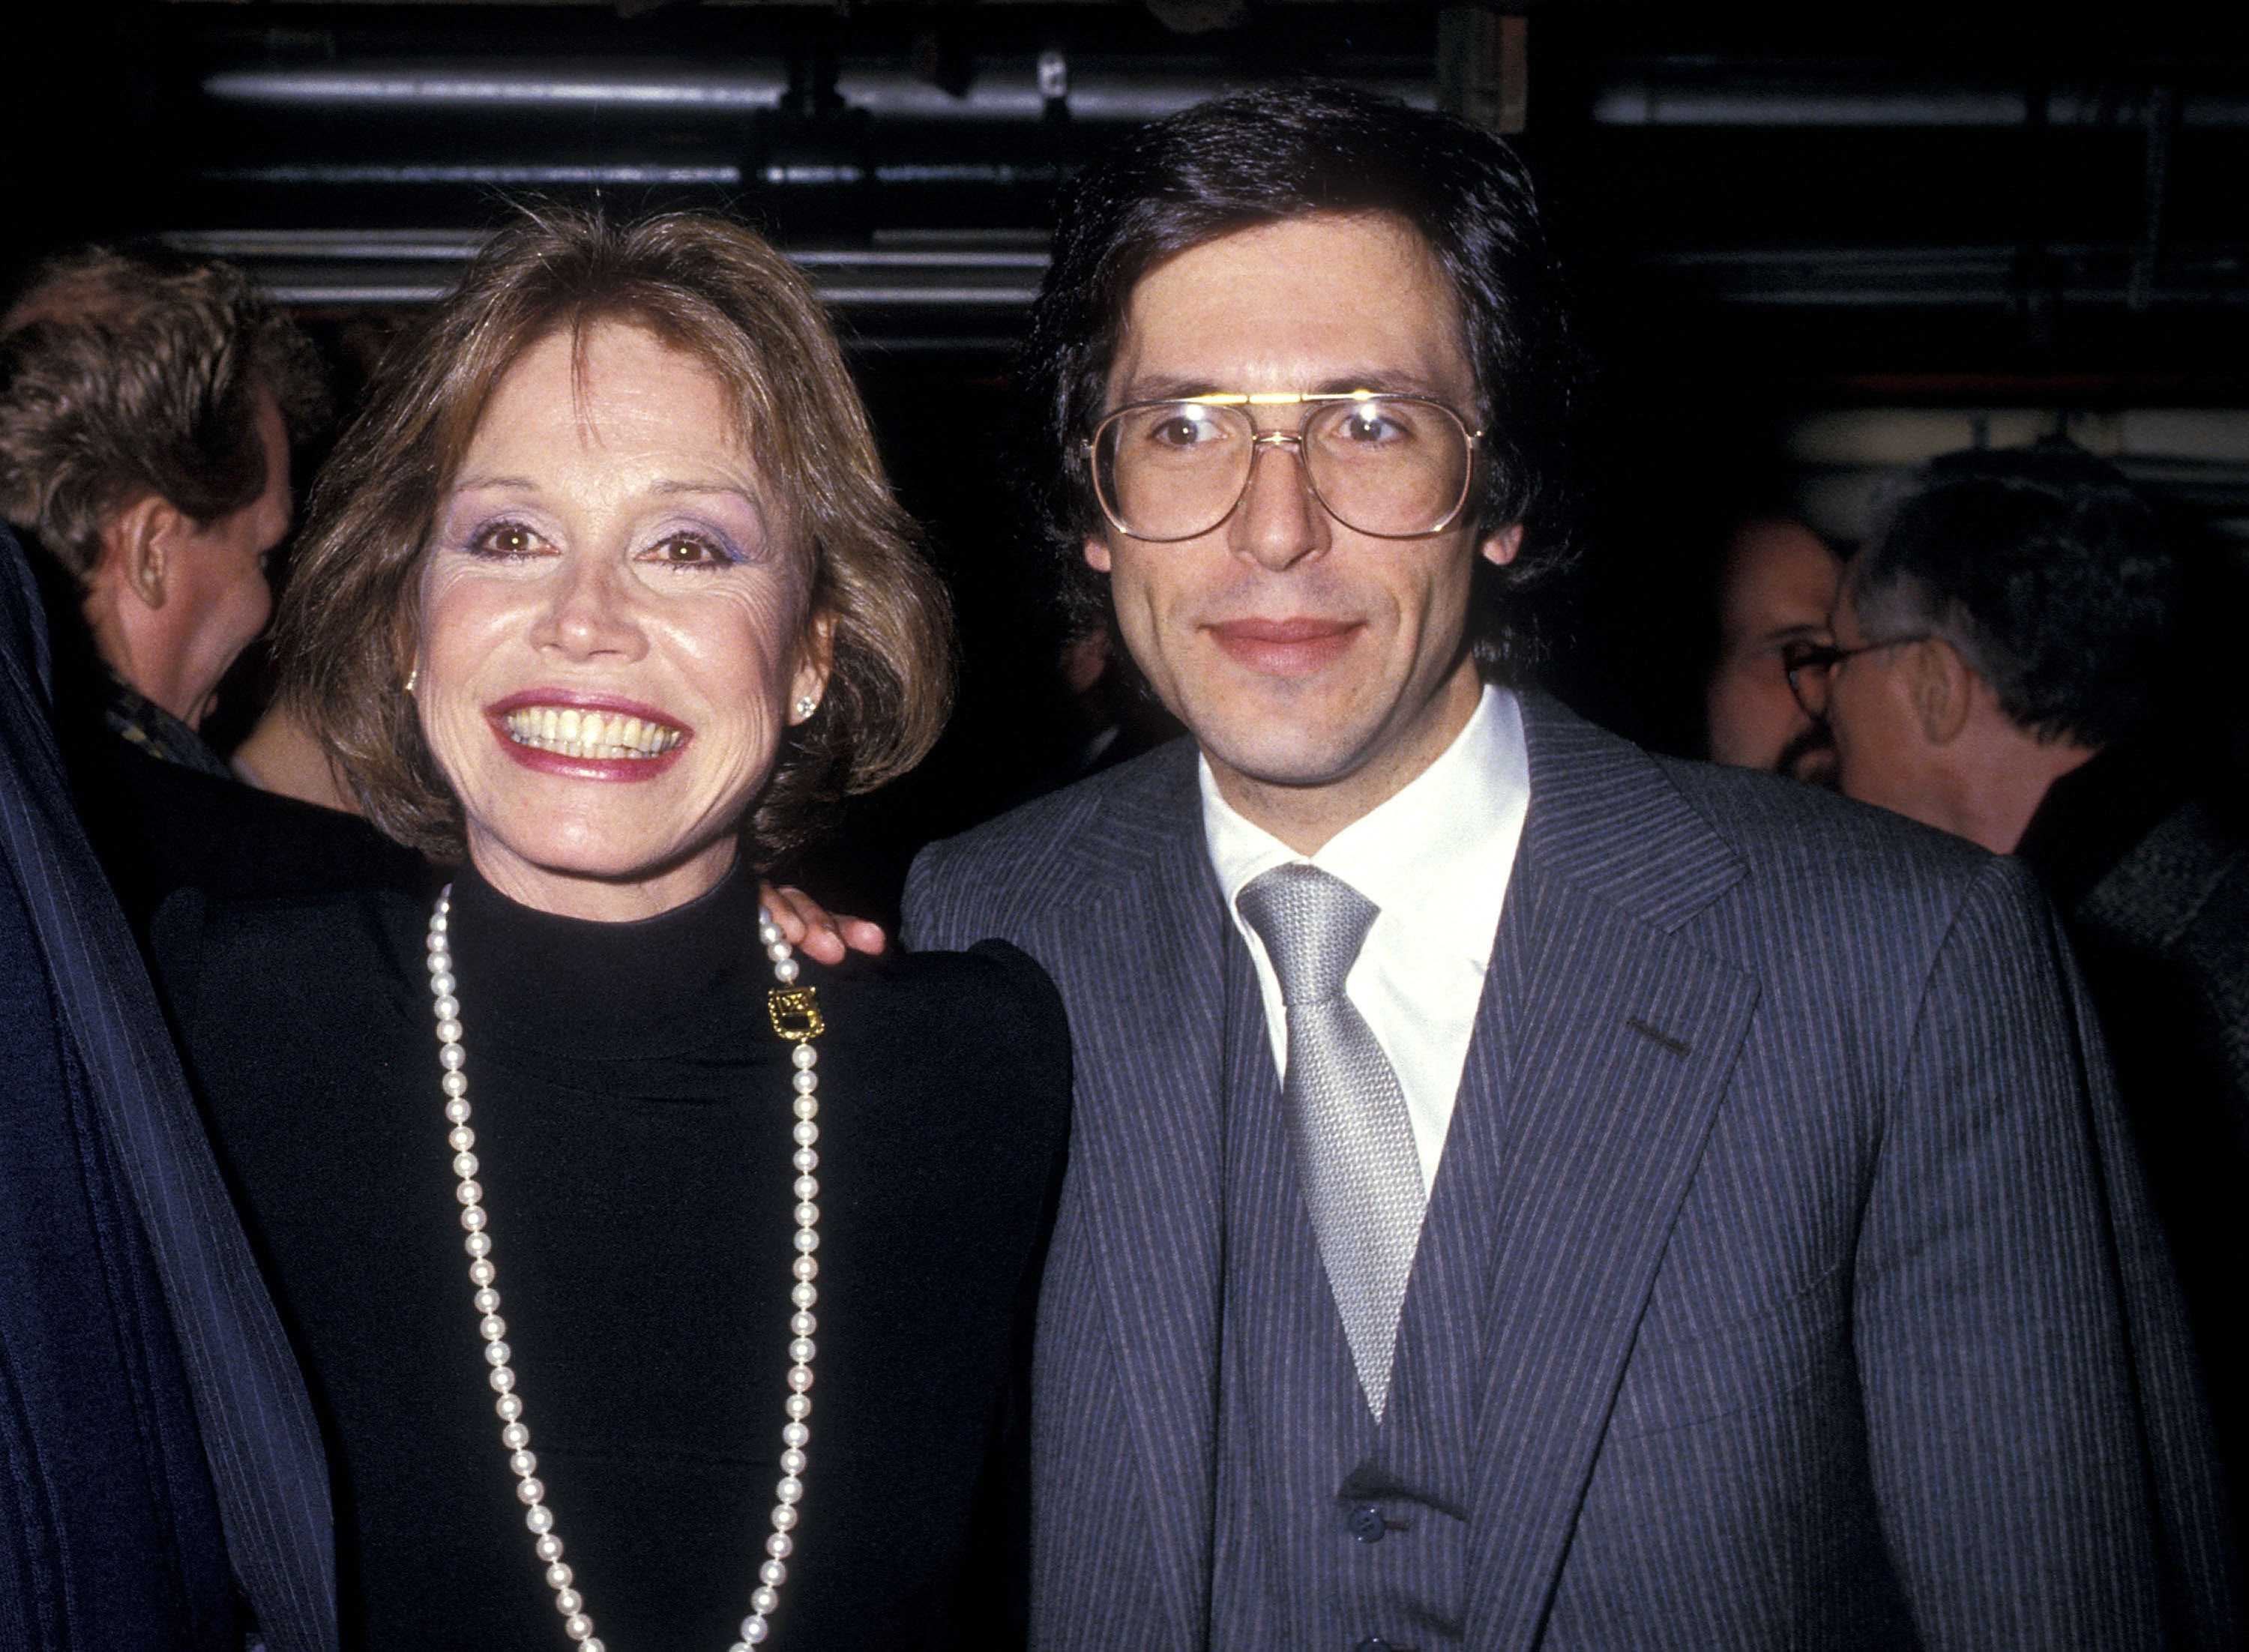 Dr. Robert Levine and Mary Tyler Moore at the 'Sweet Sue' Opening Night Performance on January 8, 1987 at the Music Box Theatre in New York City | Source: Getty Images